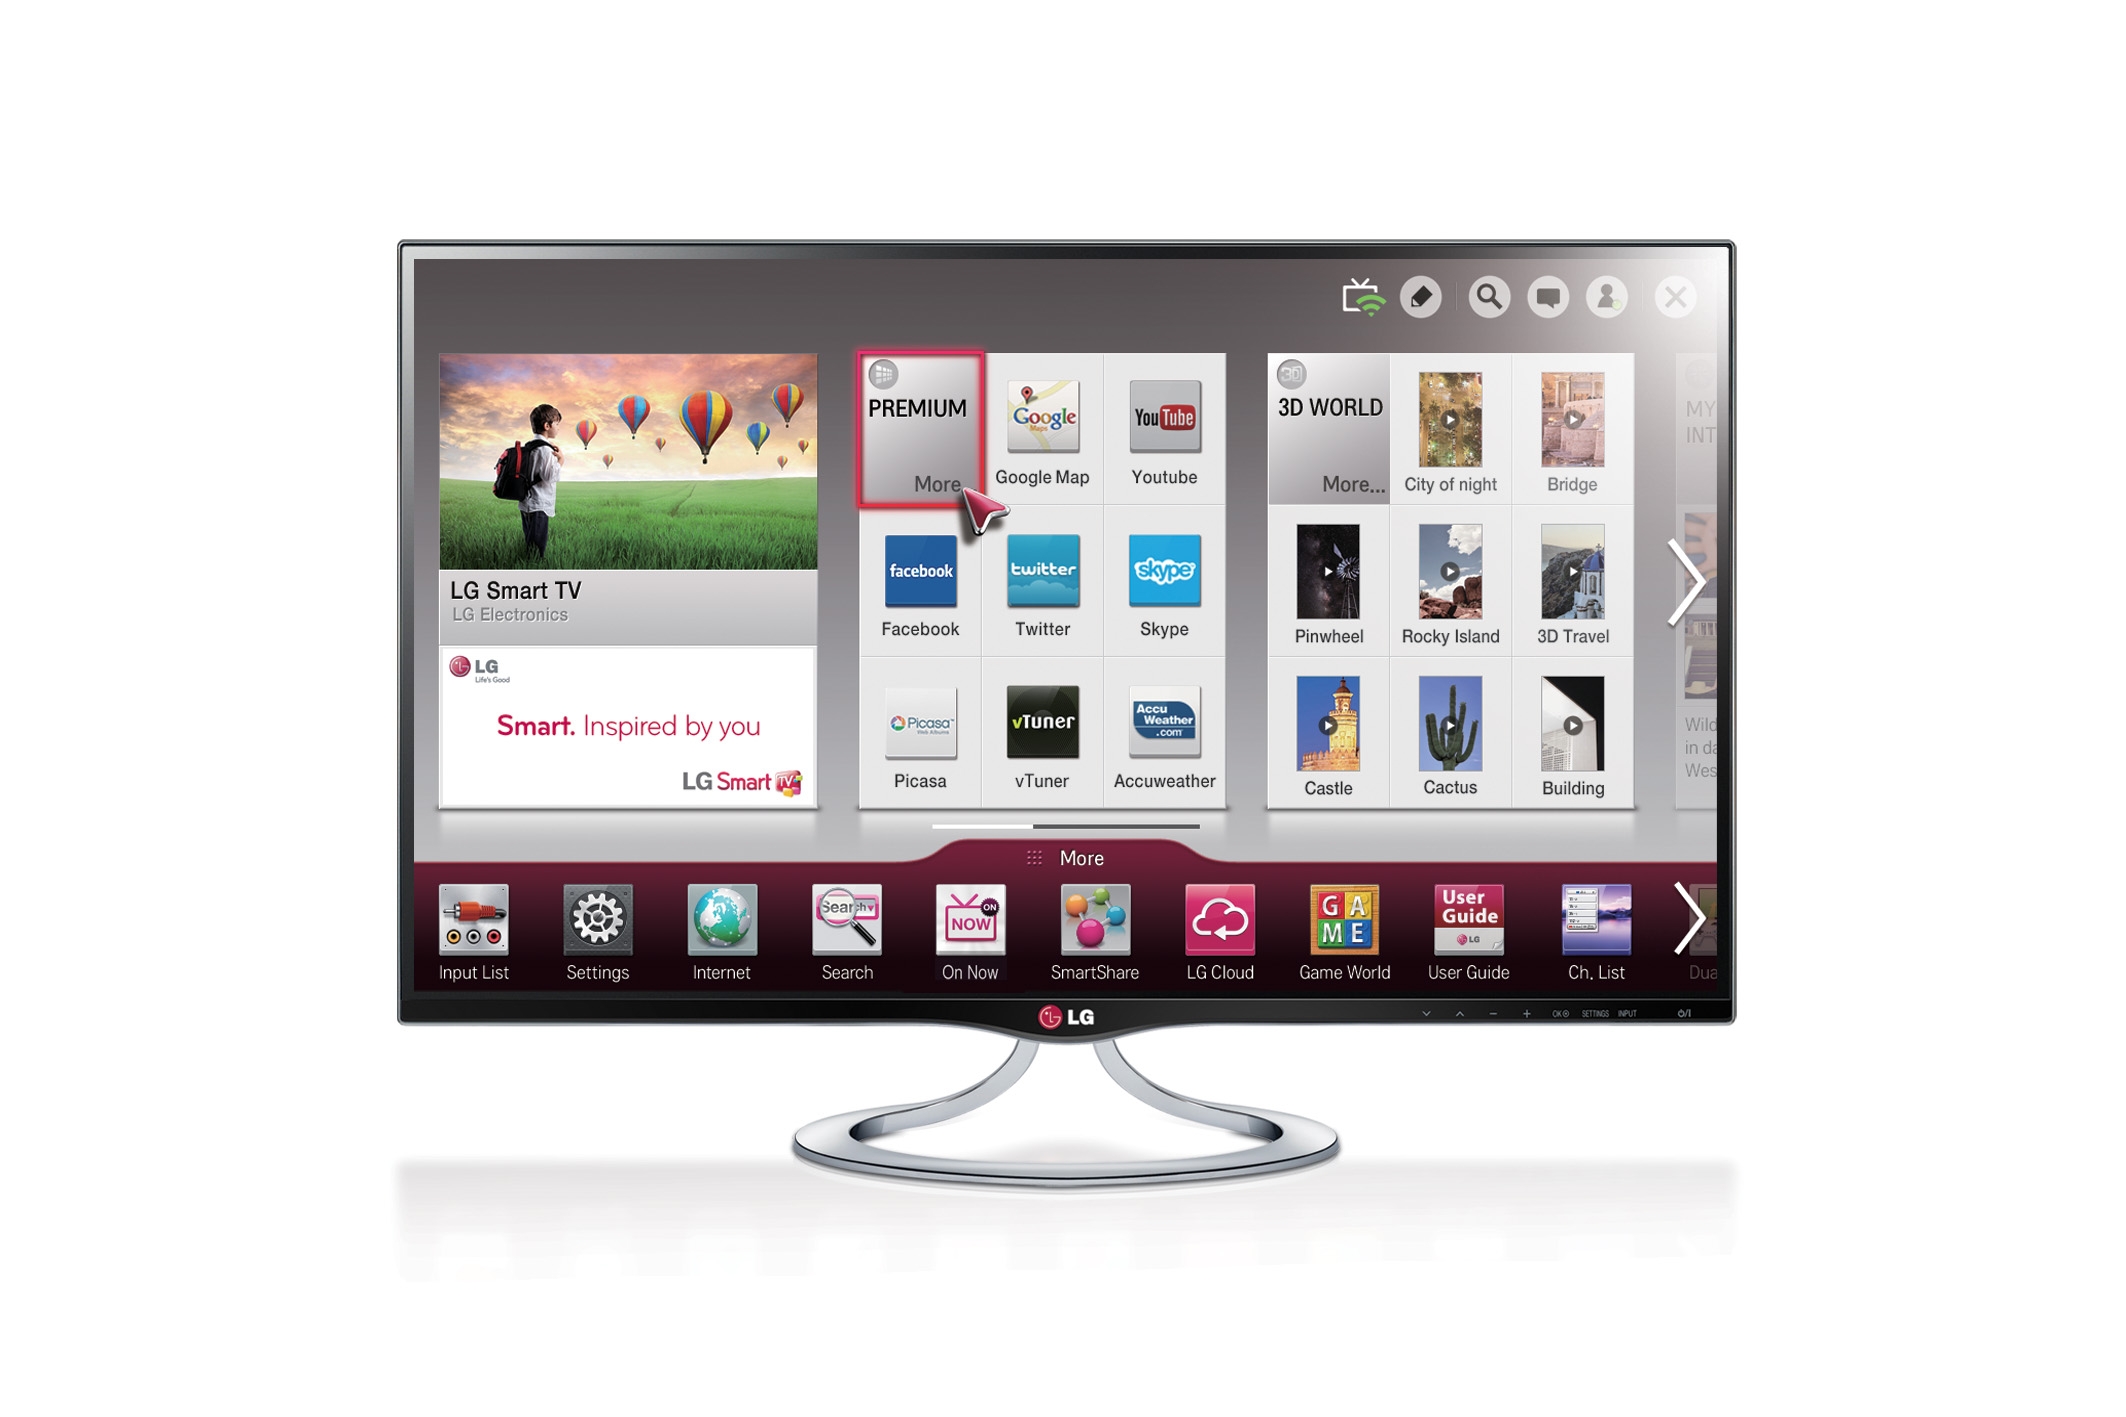 The LG 27-inch IPS Personal Smart TV model MT93 displaying the Smart Home platform on screen